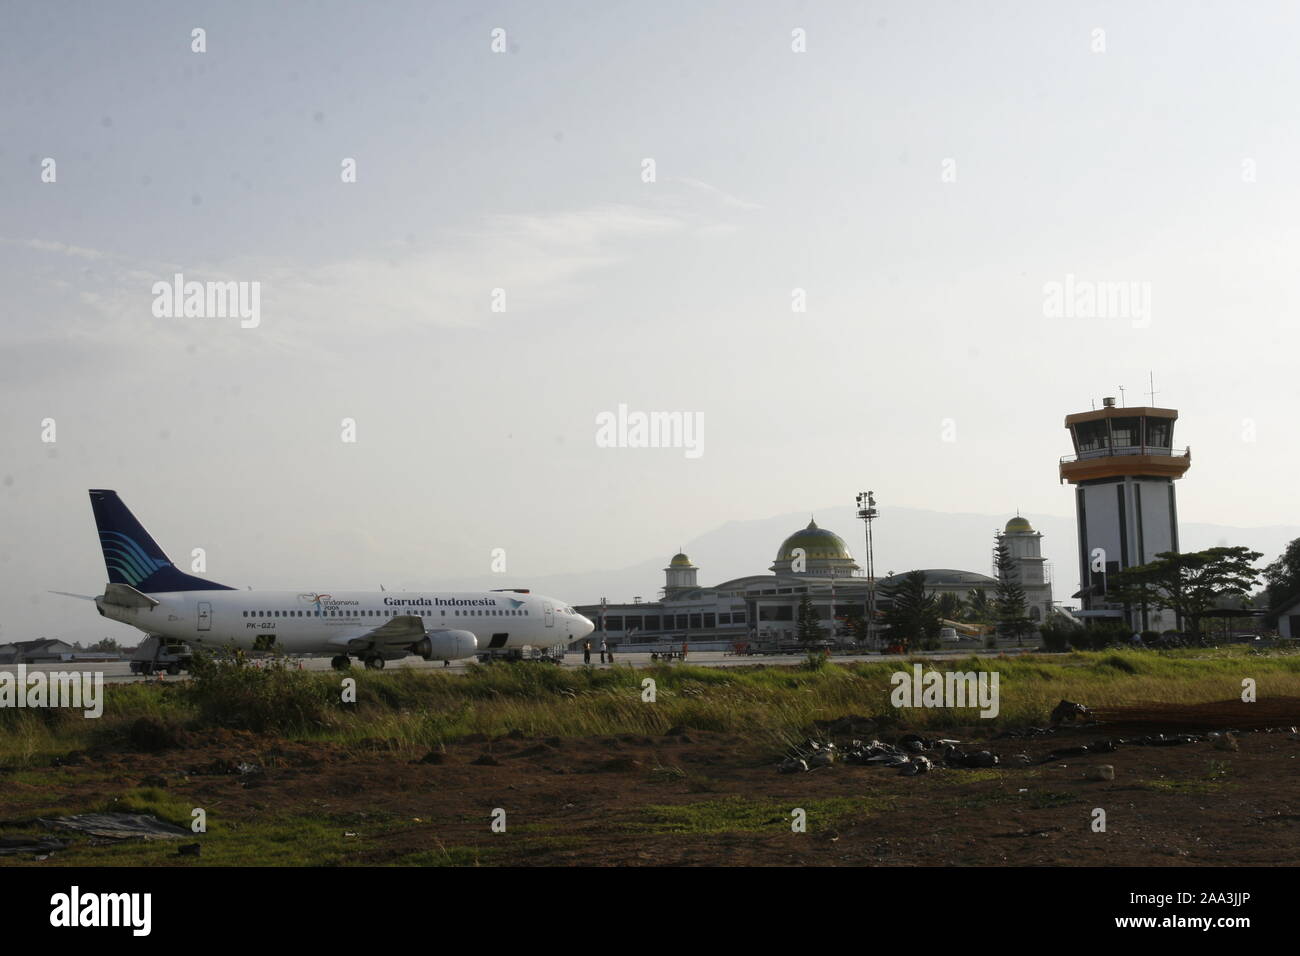 Banda Aceh, Aceh, Indonesia. October 31, 2008. Development of Banda Aceh Airport on the island of Sumatra, Indonesia, after a 3-year tsunami tragedy. Stock Photo